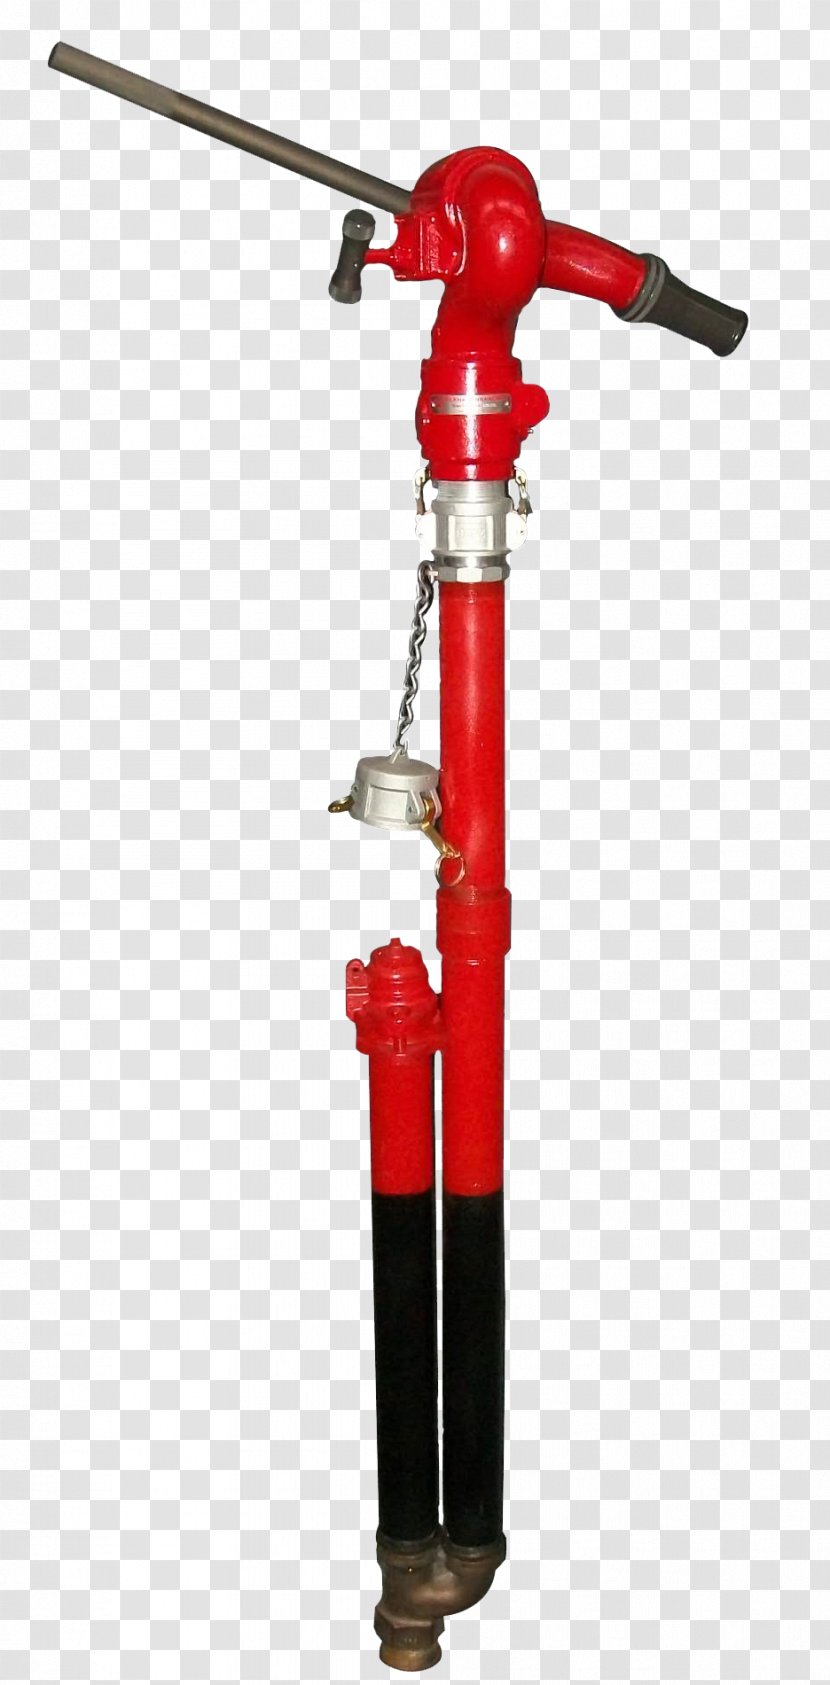 Fire Hydrant Flushing Water - Tool Transparent PNG